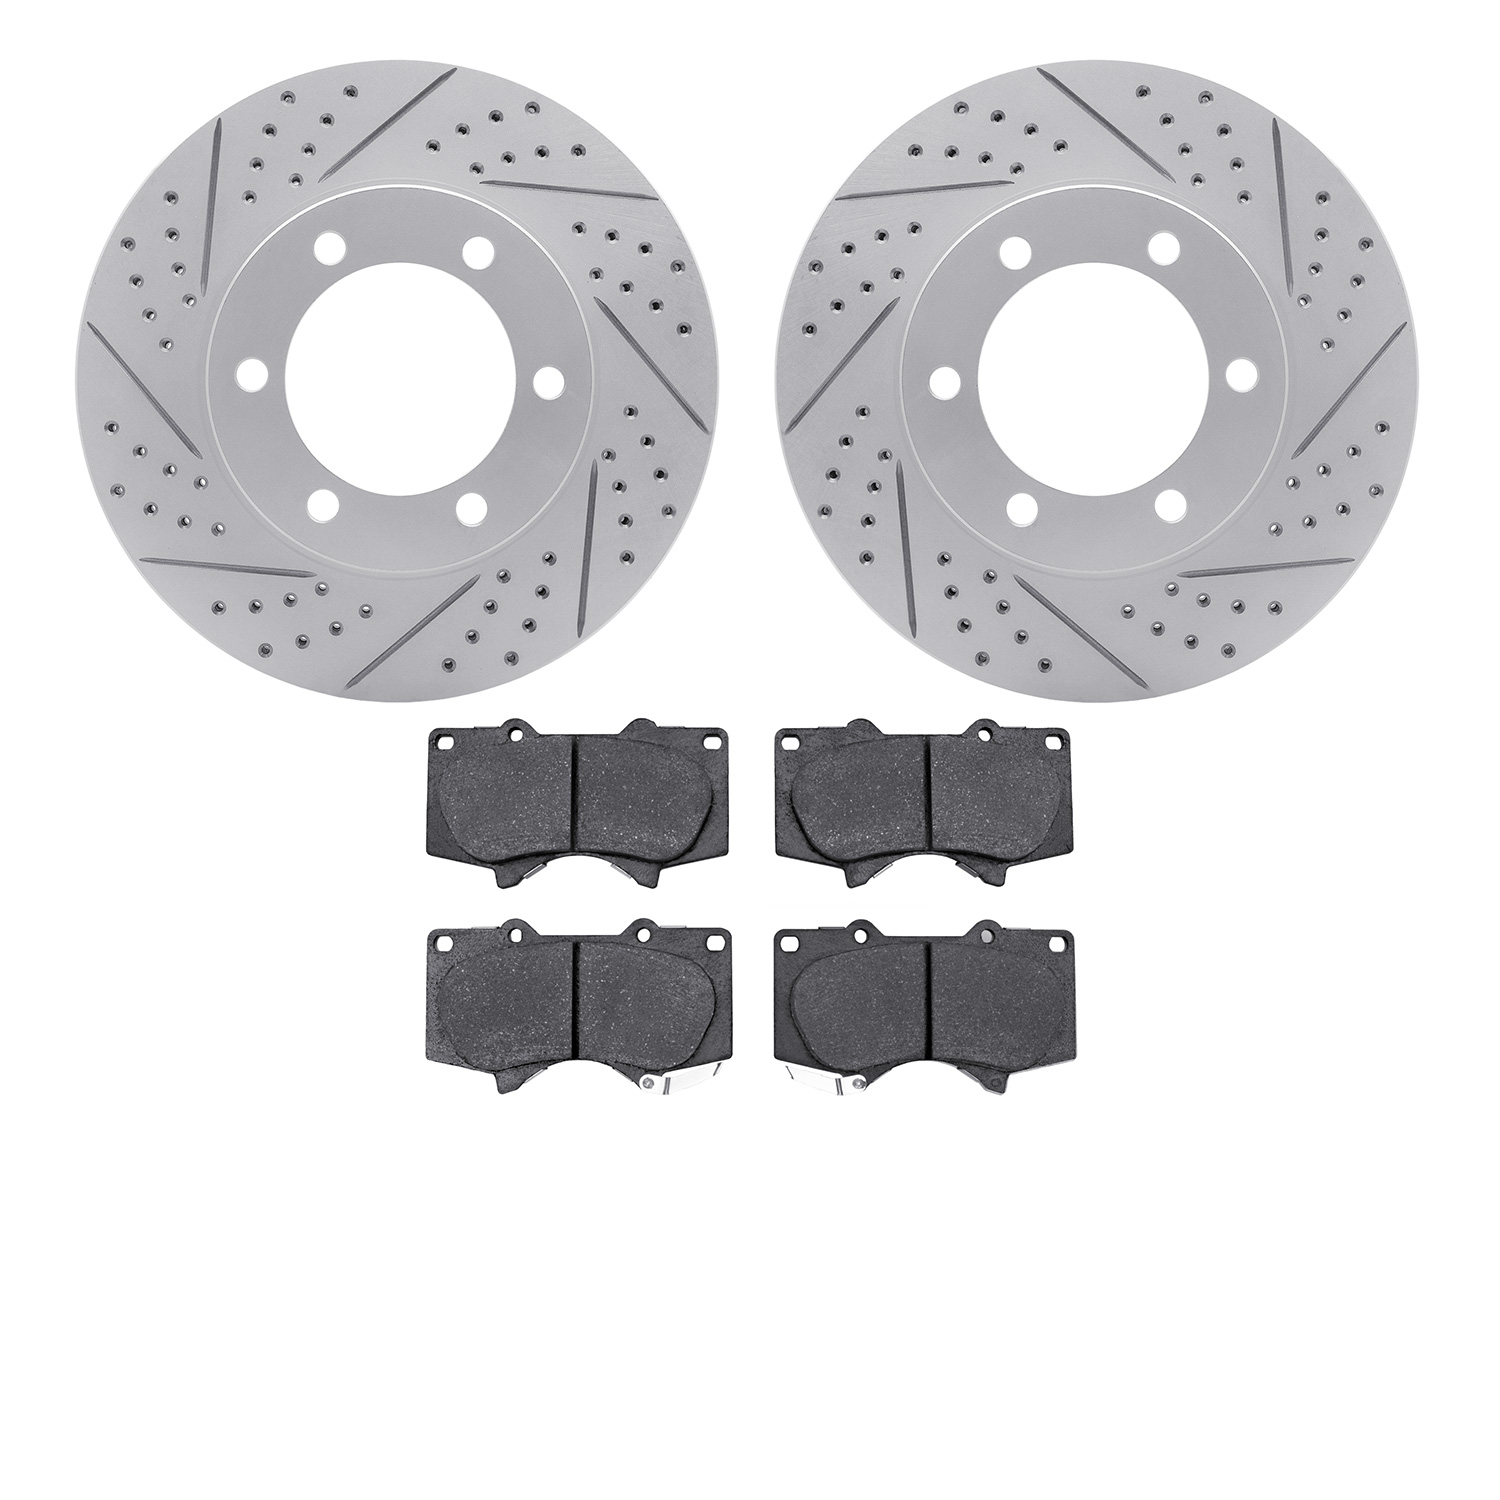 2202-76002 Geoperformance Drilled/Slotted Rotors w/Heavy-Duty Pads Kit, 2000-2007 Lexus/Toyota/Scion, Position: Front